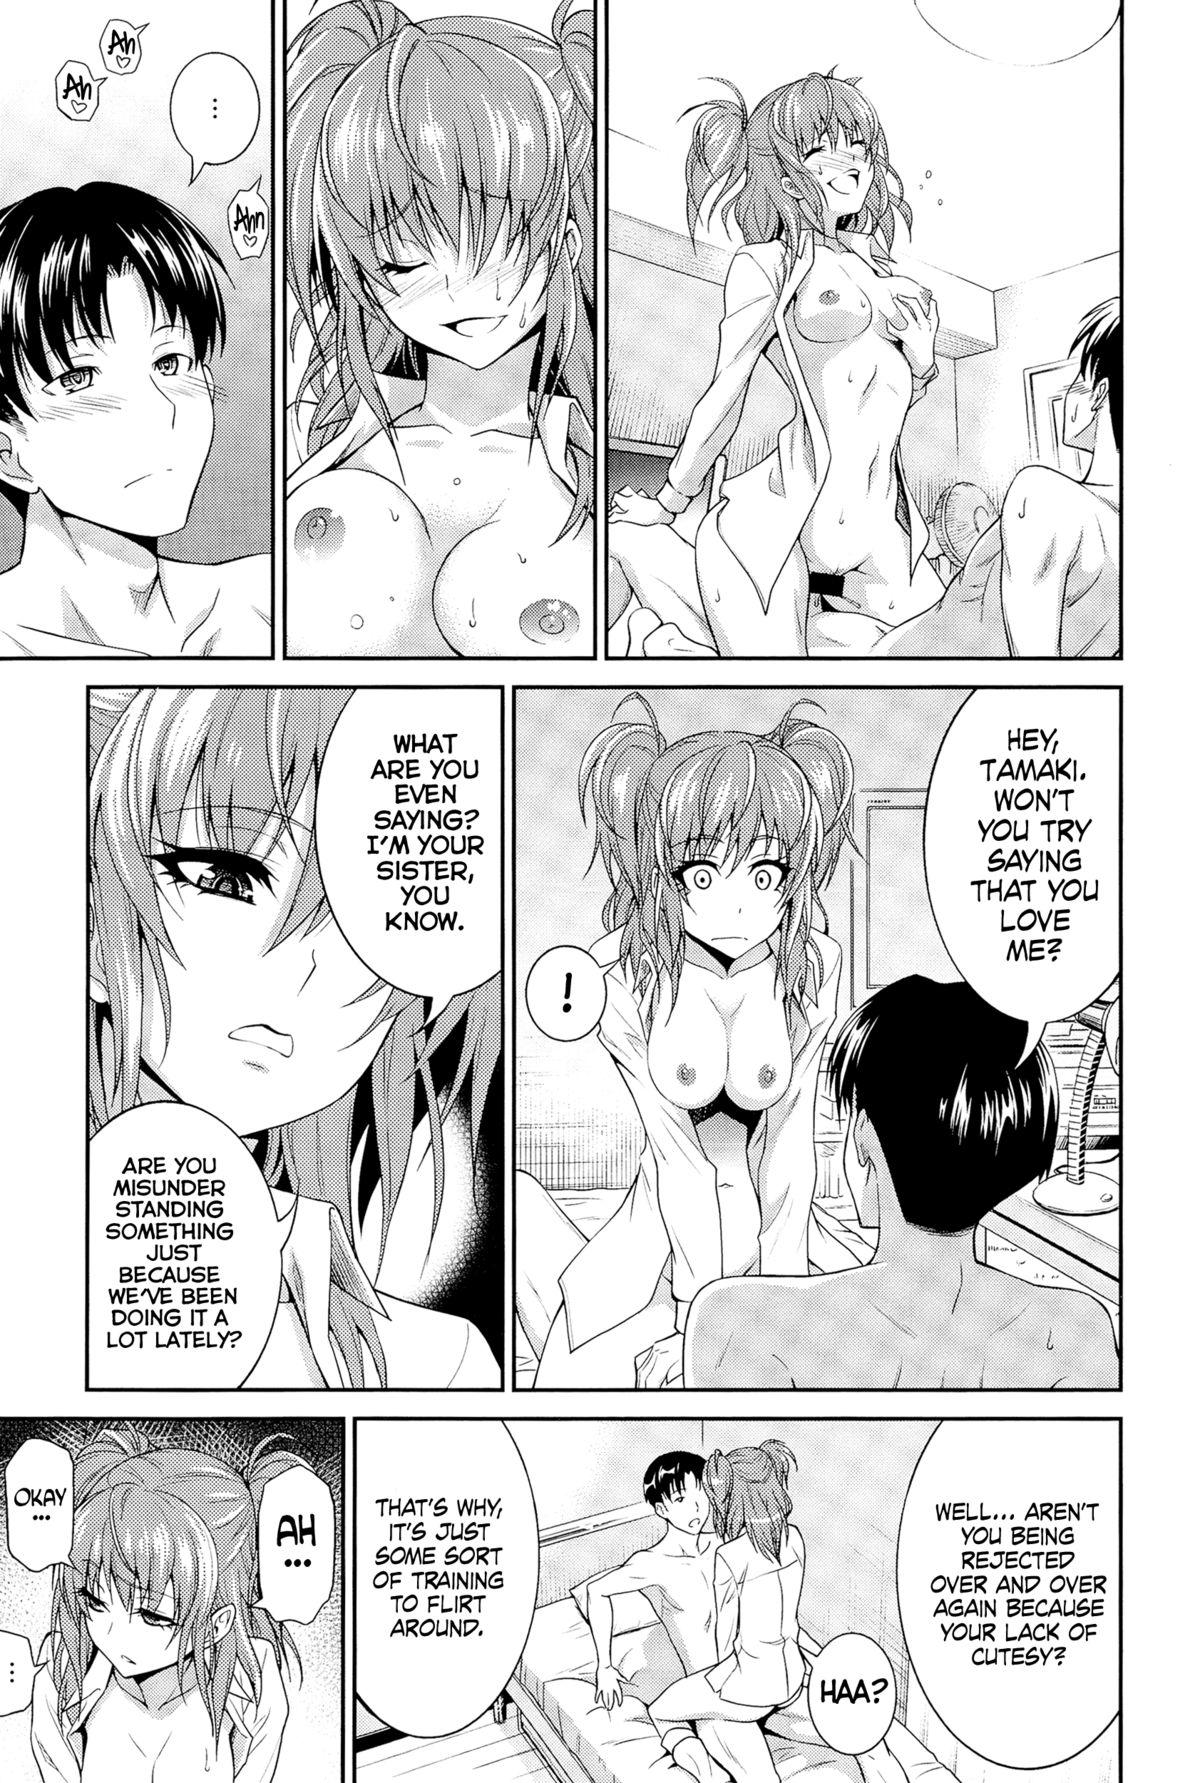 Exhibition Imouto no Iiwake | Sister's Excuse Round Ass - Page 11